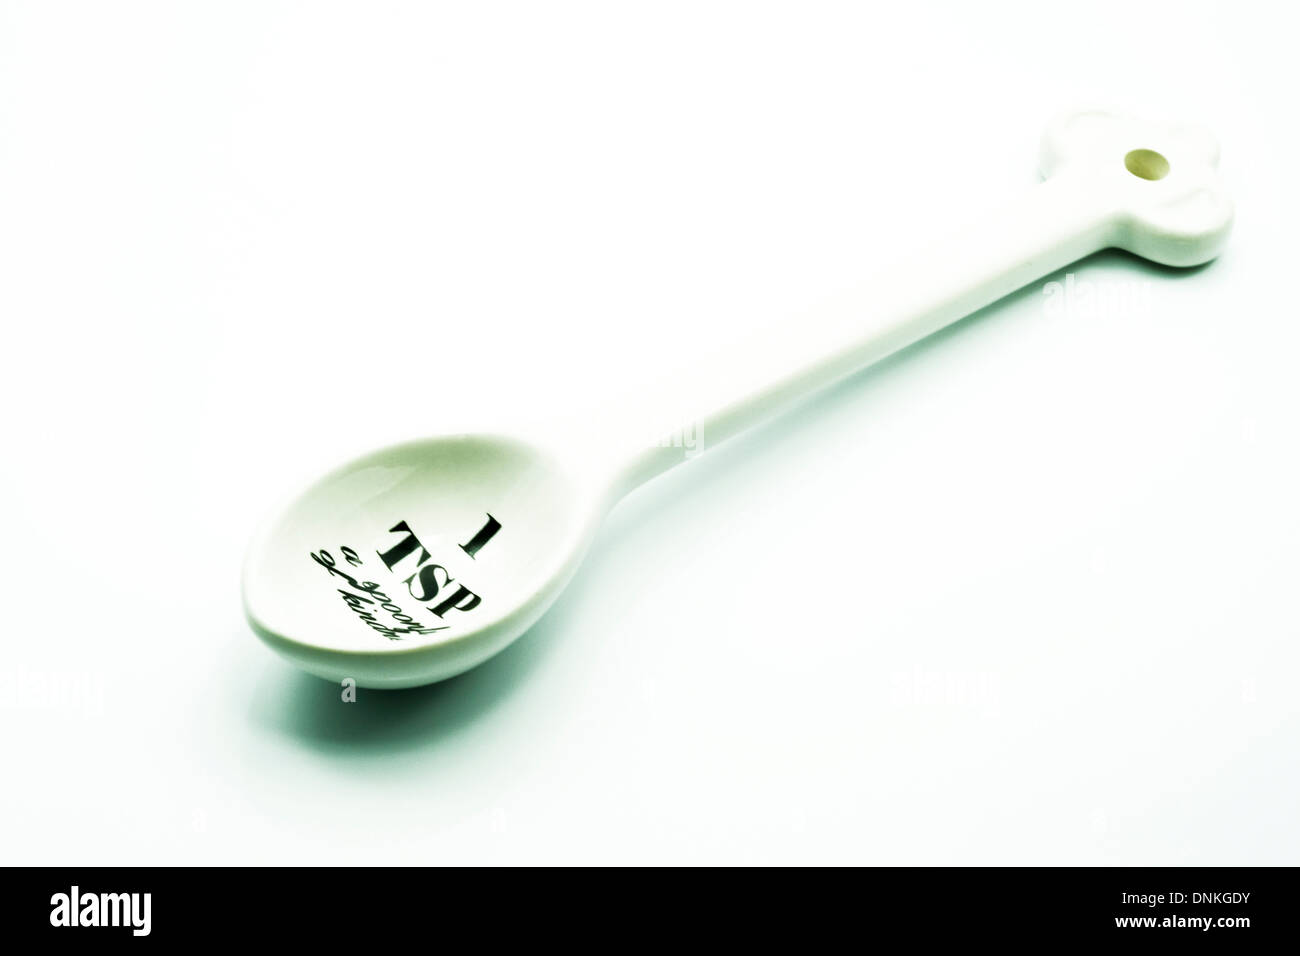 https://c8.alamy.com/comp/DNKGDY/measuring-spoon-teaspoon-for-cooking-cut-out-white-background-copy-DNKGDY.jpg